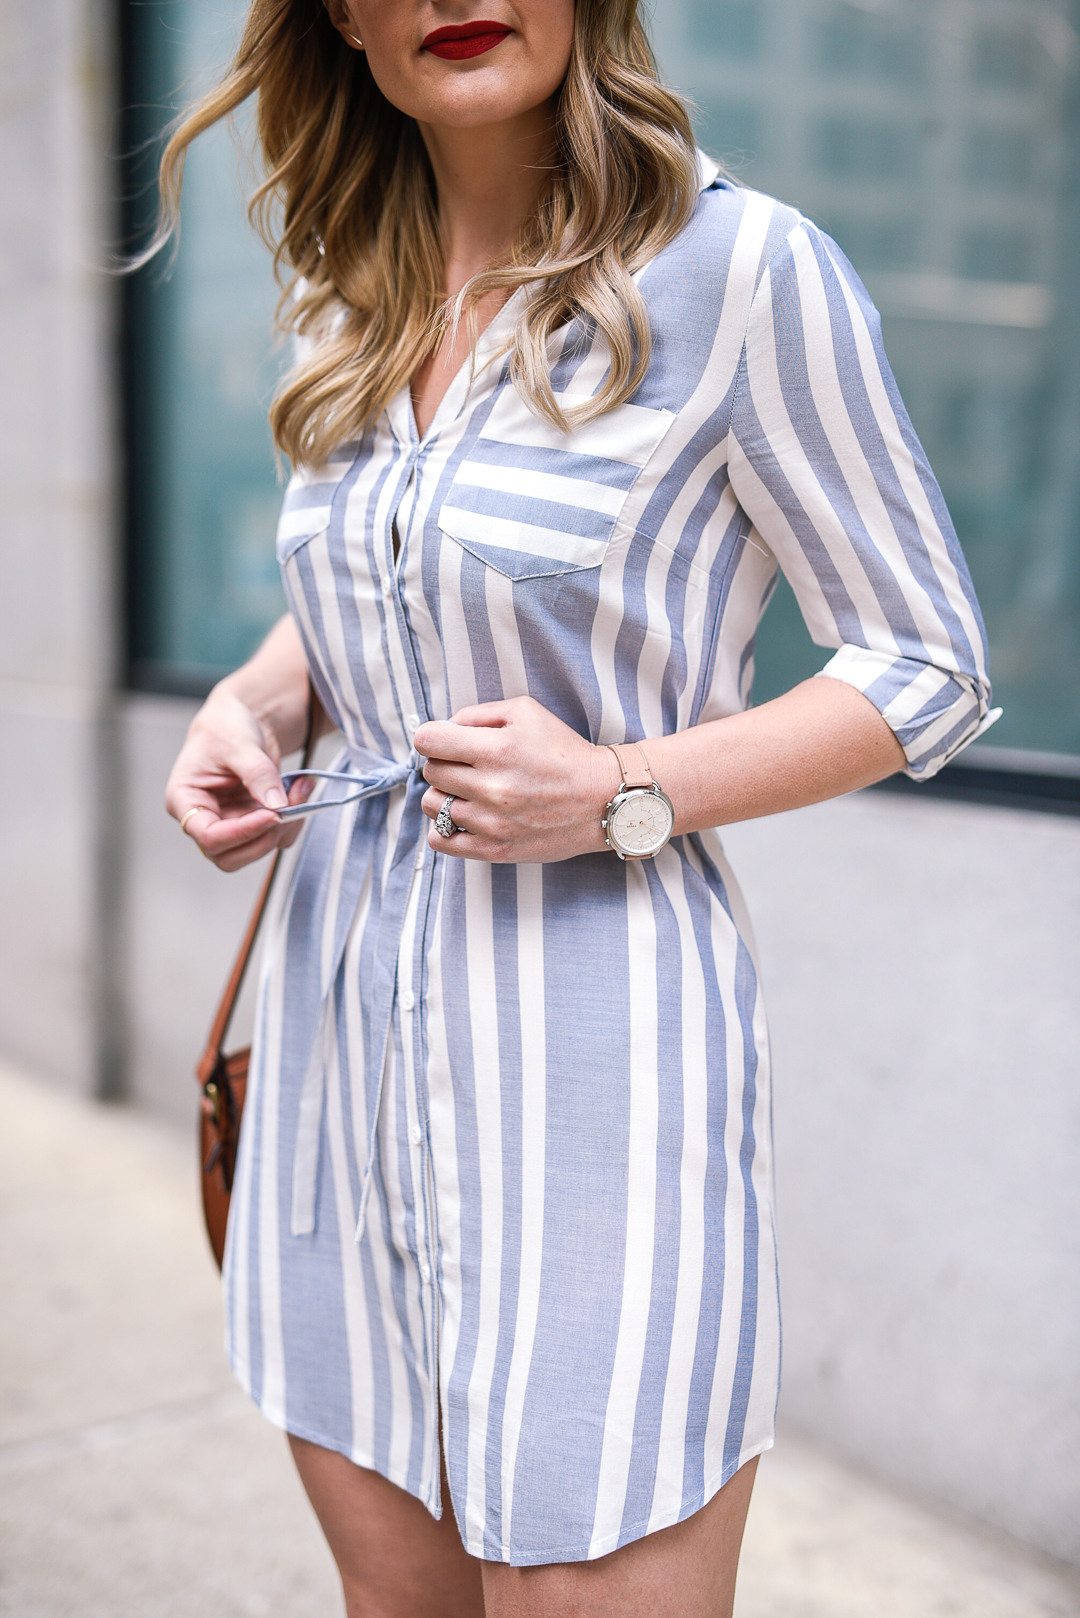 simple shirt dress for casual ootd outfit ideas